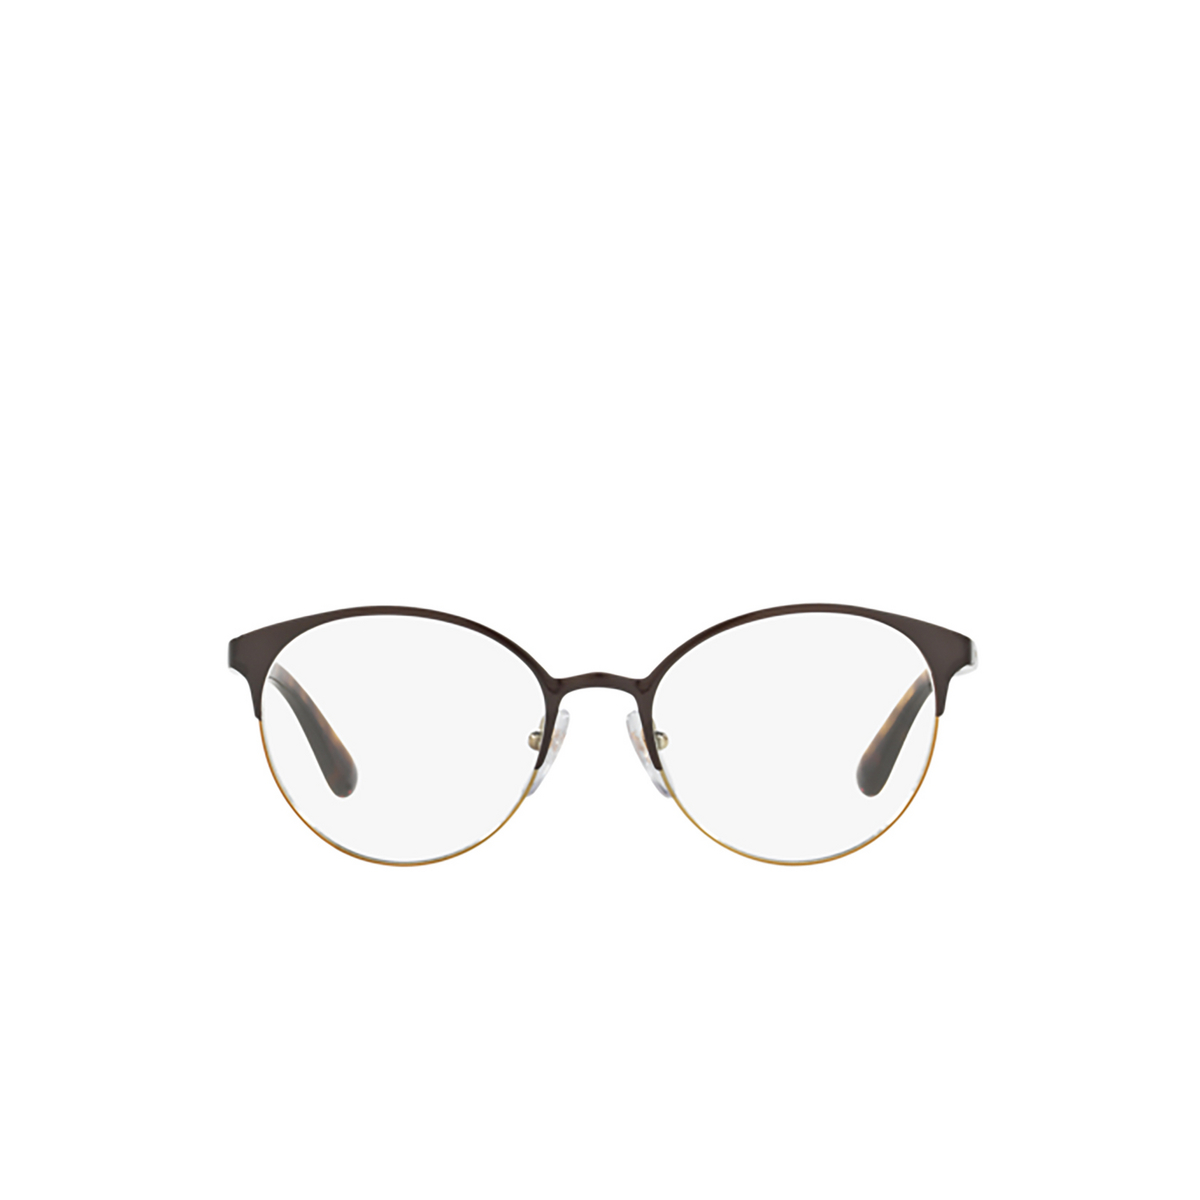 Vogue VO4011 Eyeglasses 997 Top brown/pale gold - front view